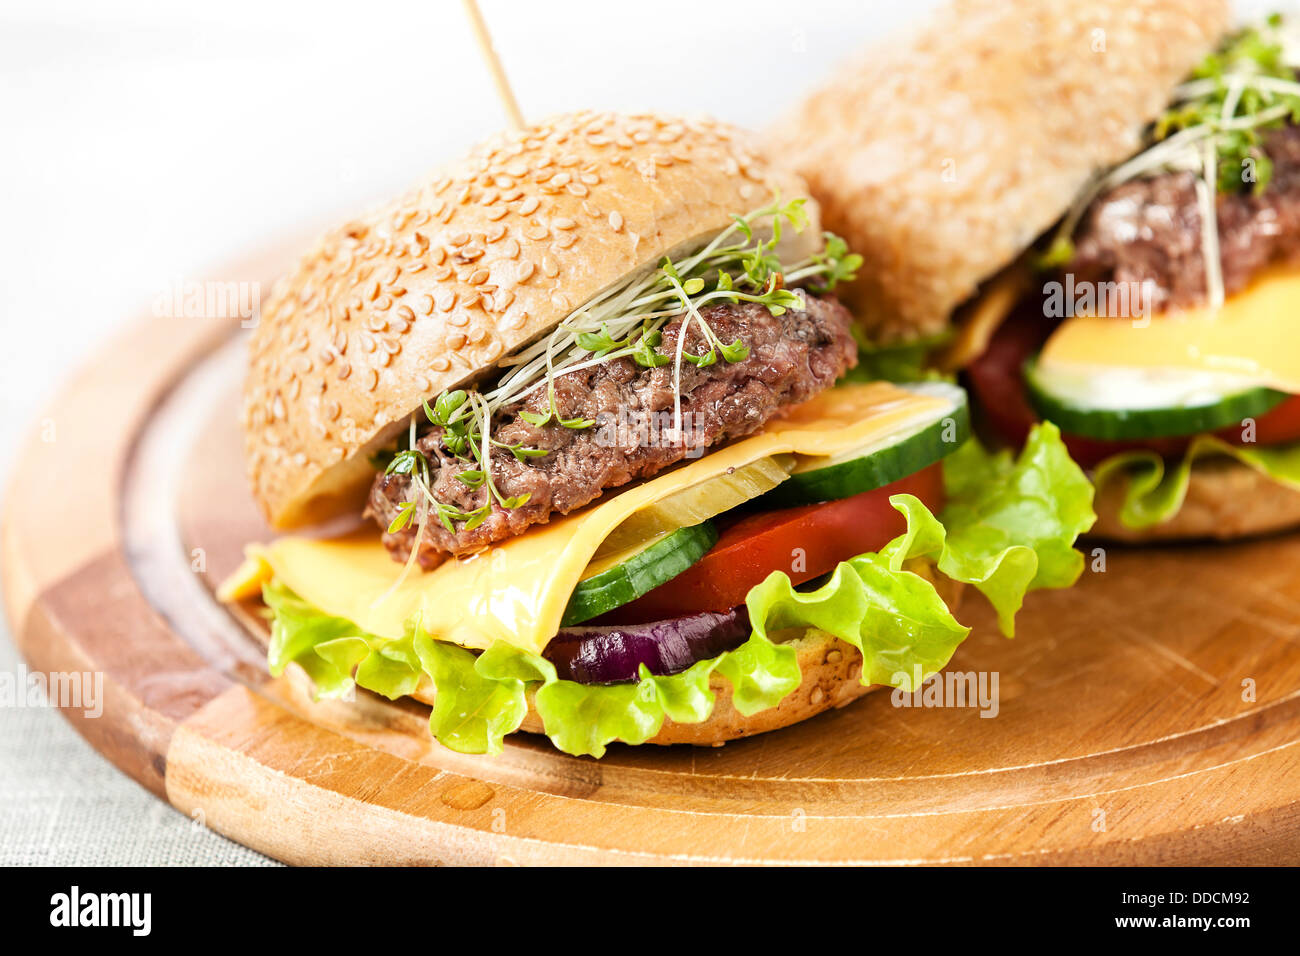 Two burgers with meat and greens Stock Photo